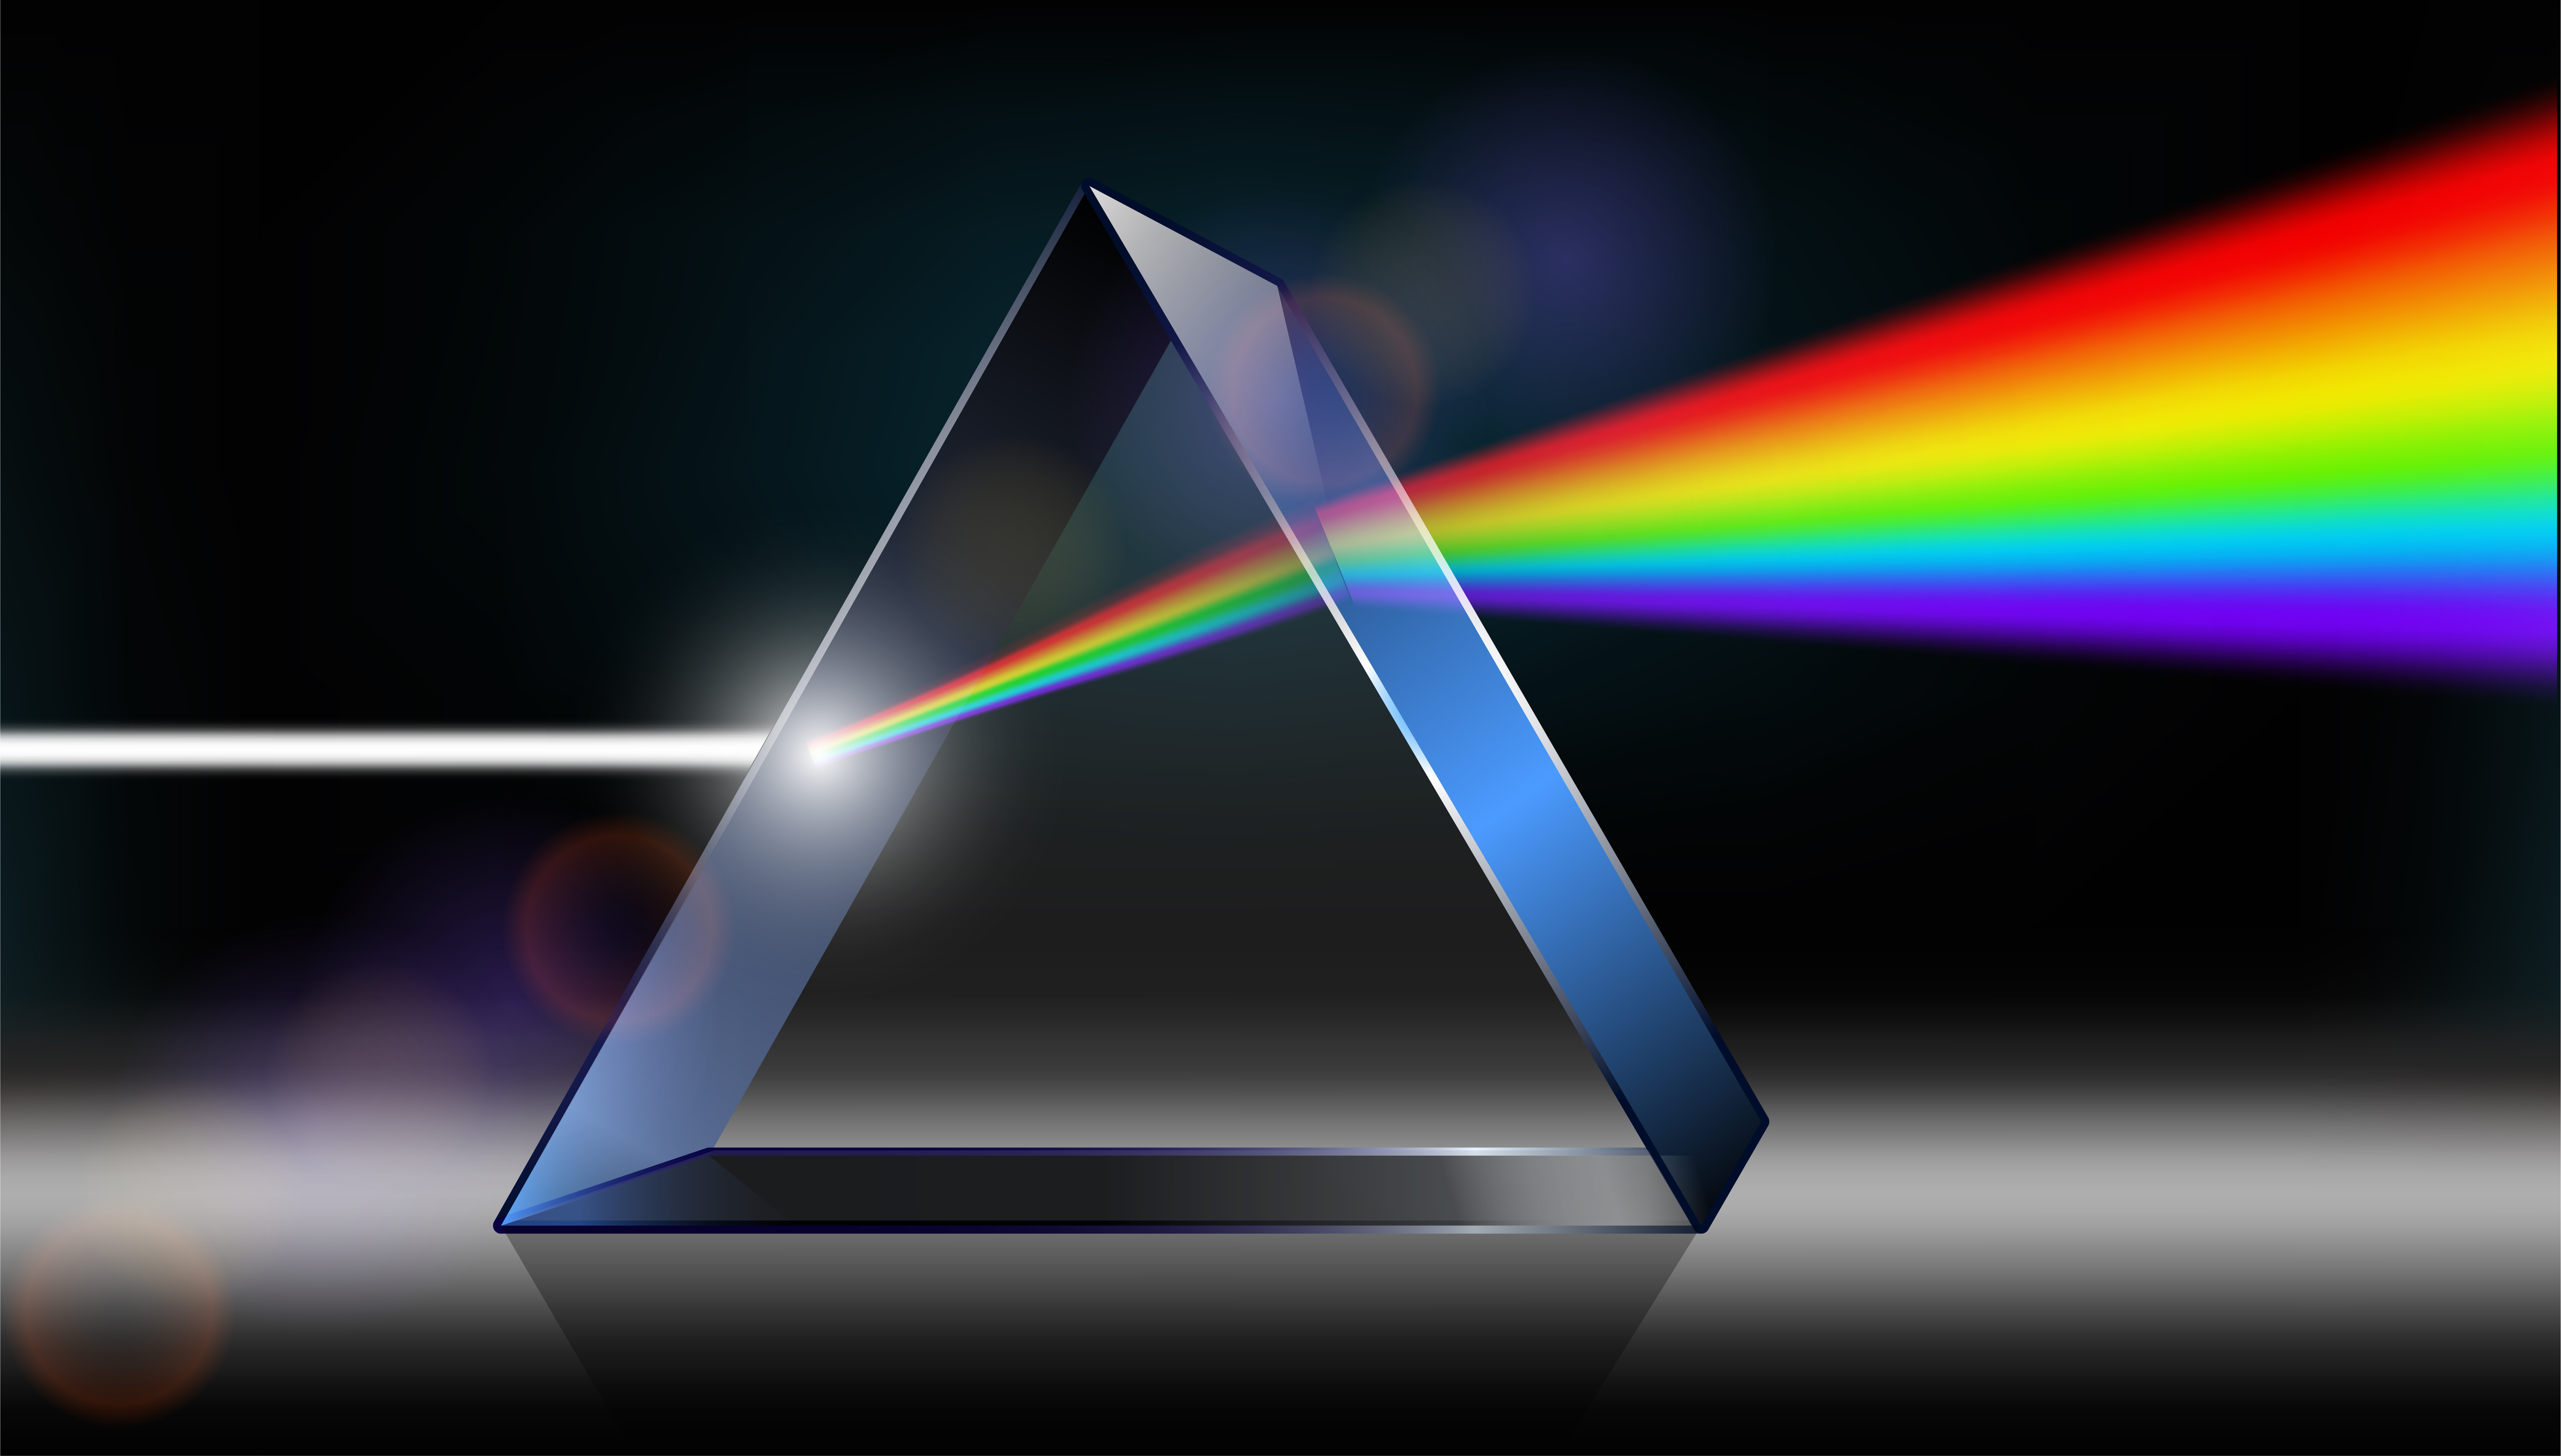 White light being split by a prism